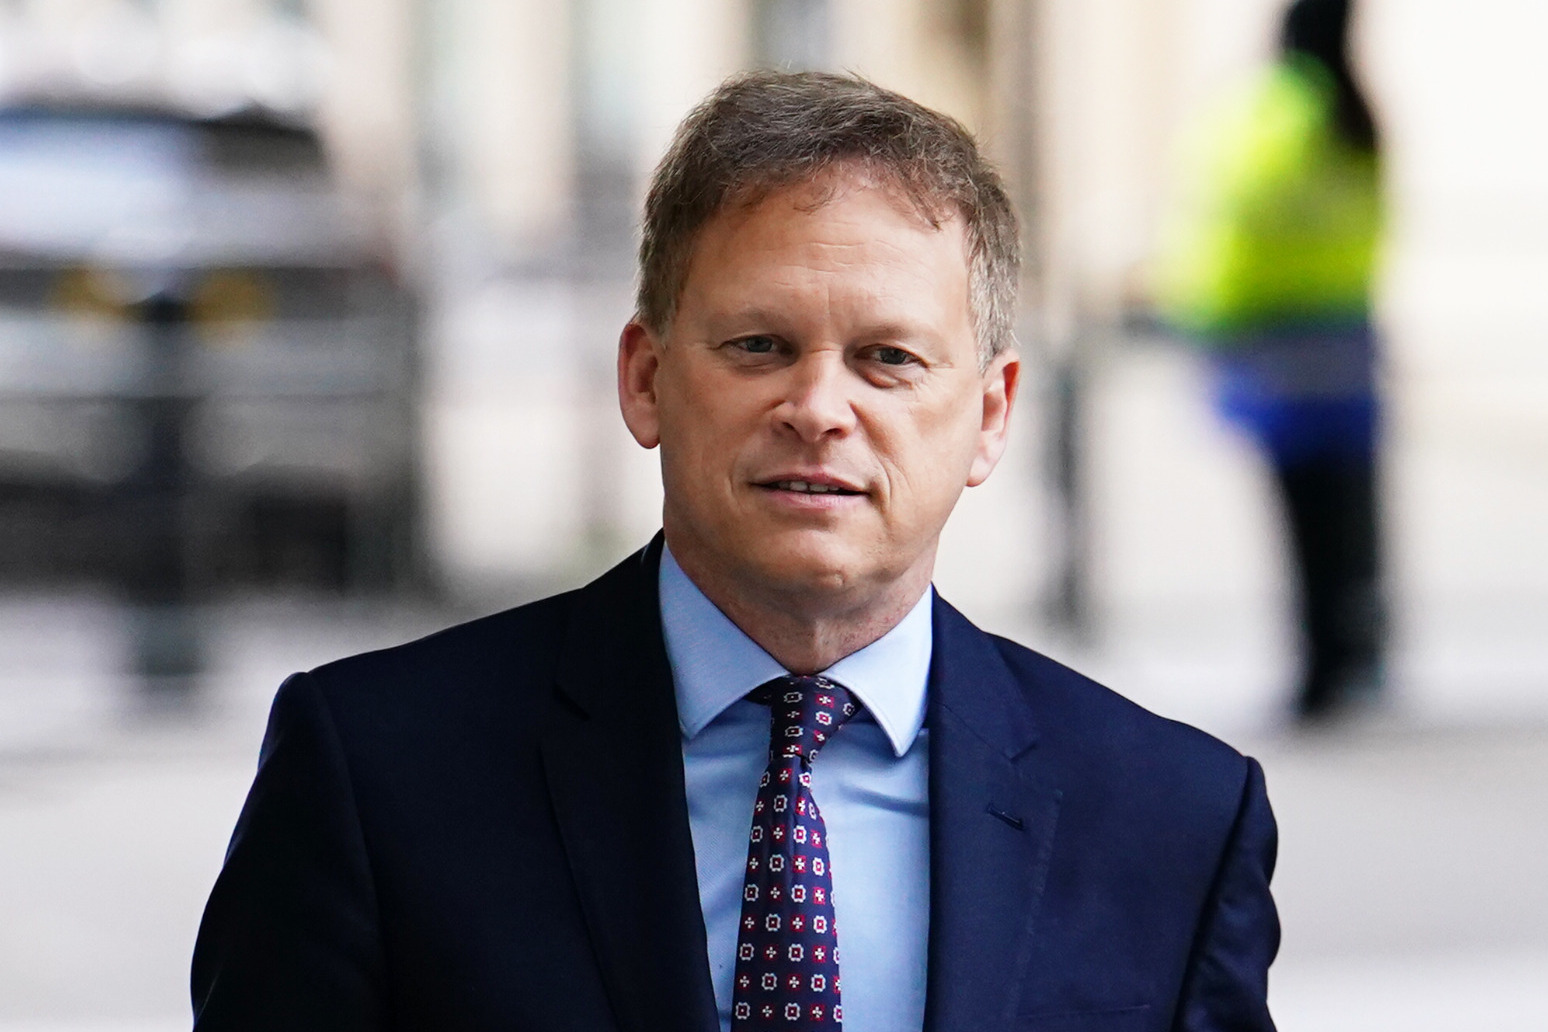 Network Rail boss suggests Grant Shapps ‘galvanised’ workers to strike 